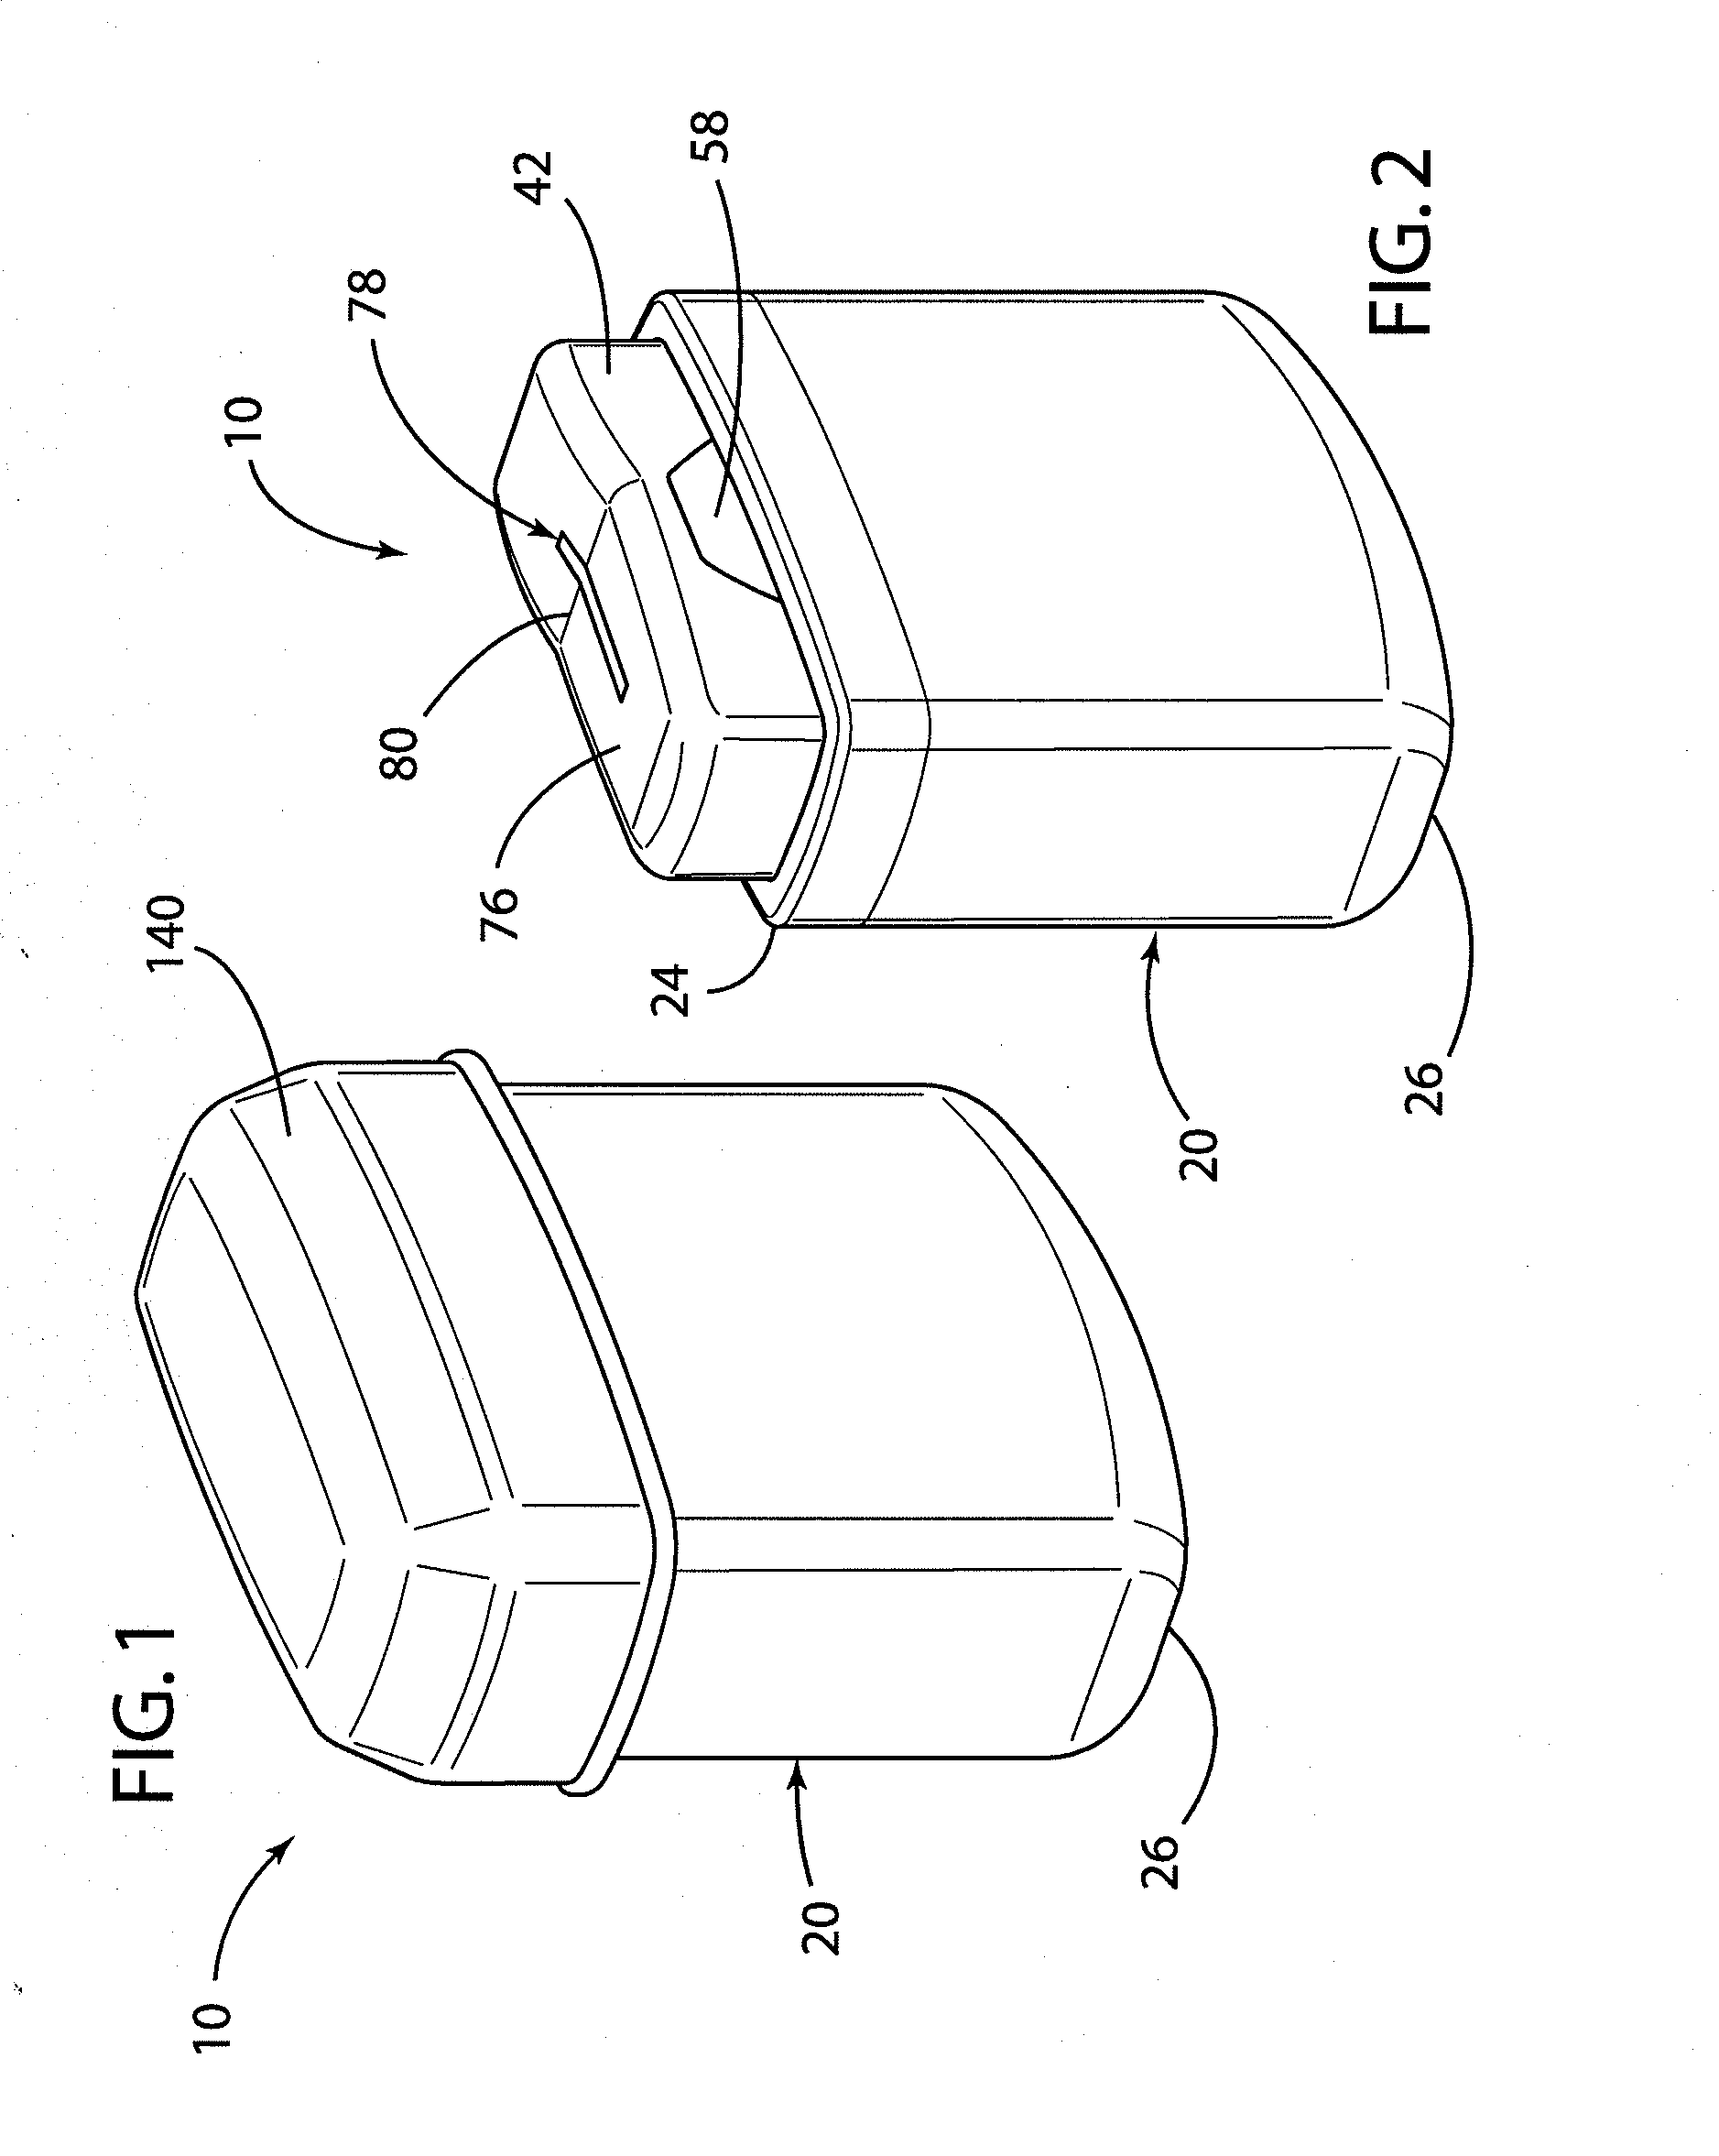 Contact activated incision device